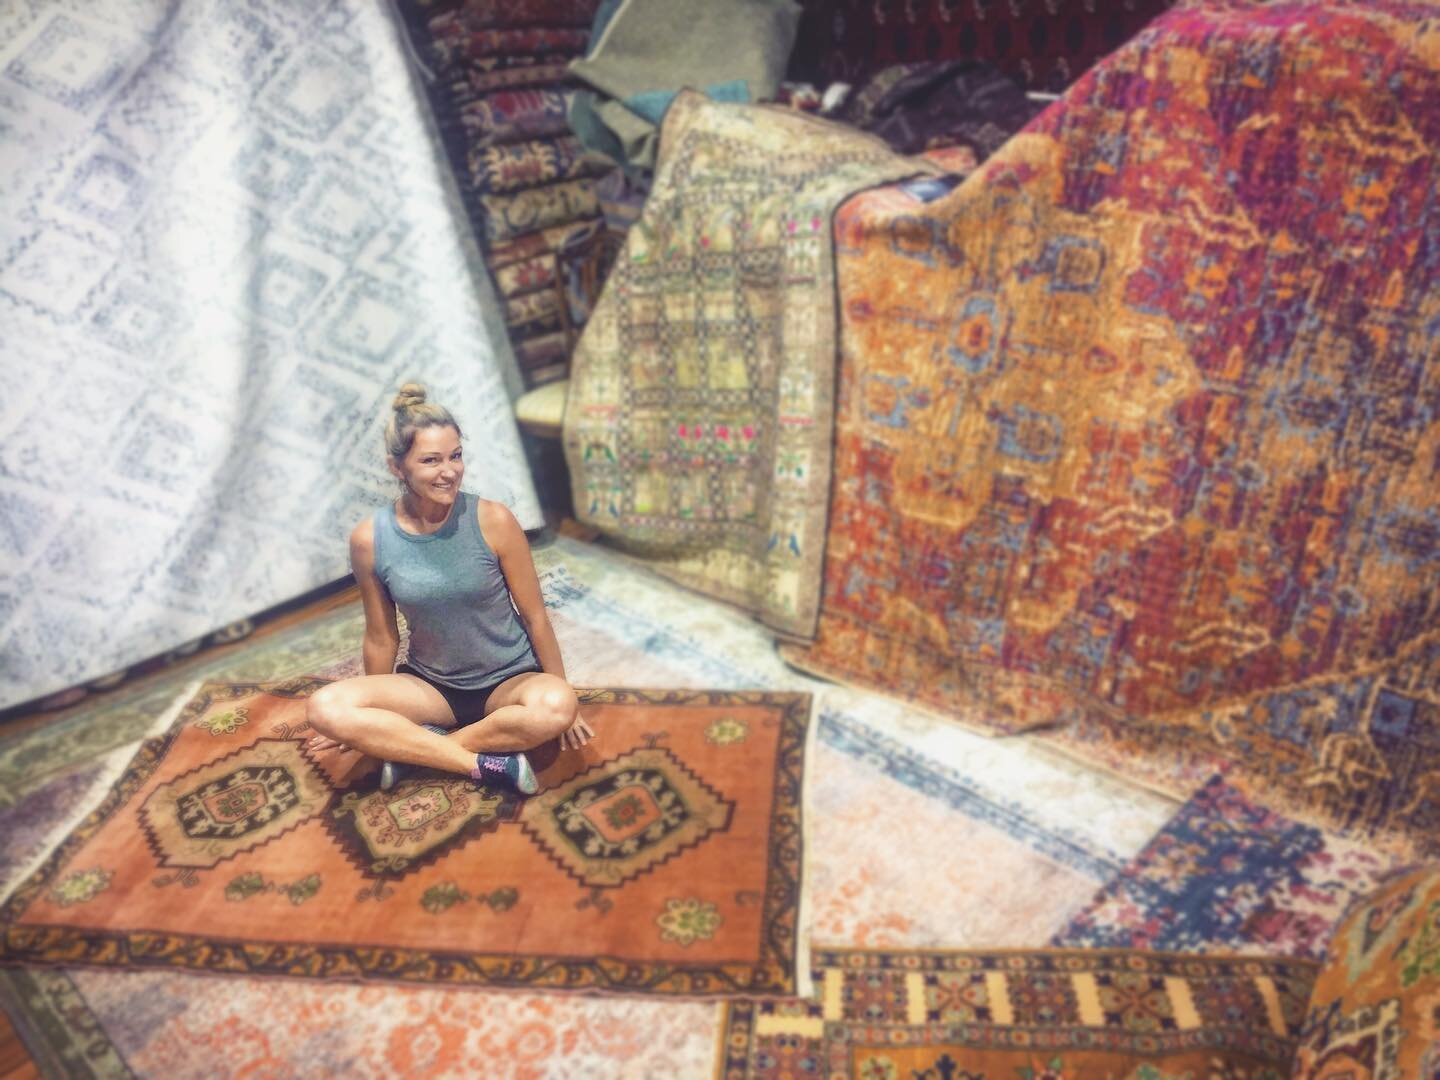 A random rugs galore score for me and some clients awhile back on a trip thru Greece 🤗

#h2finishes #decor #inspirationtravel